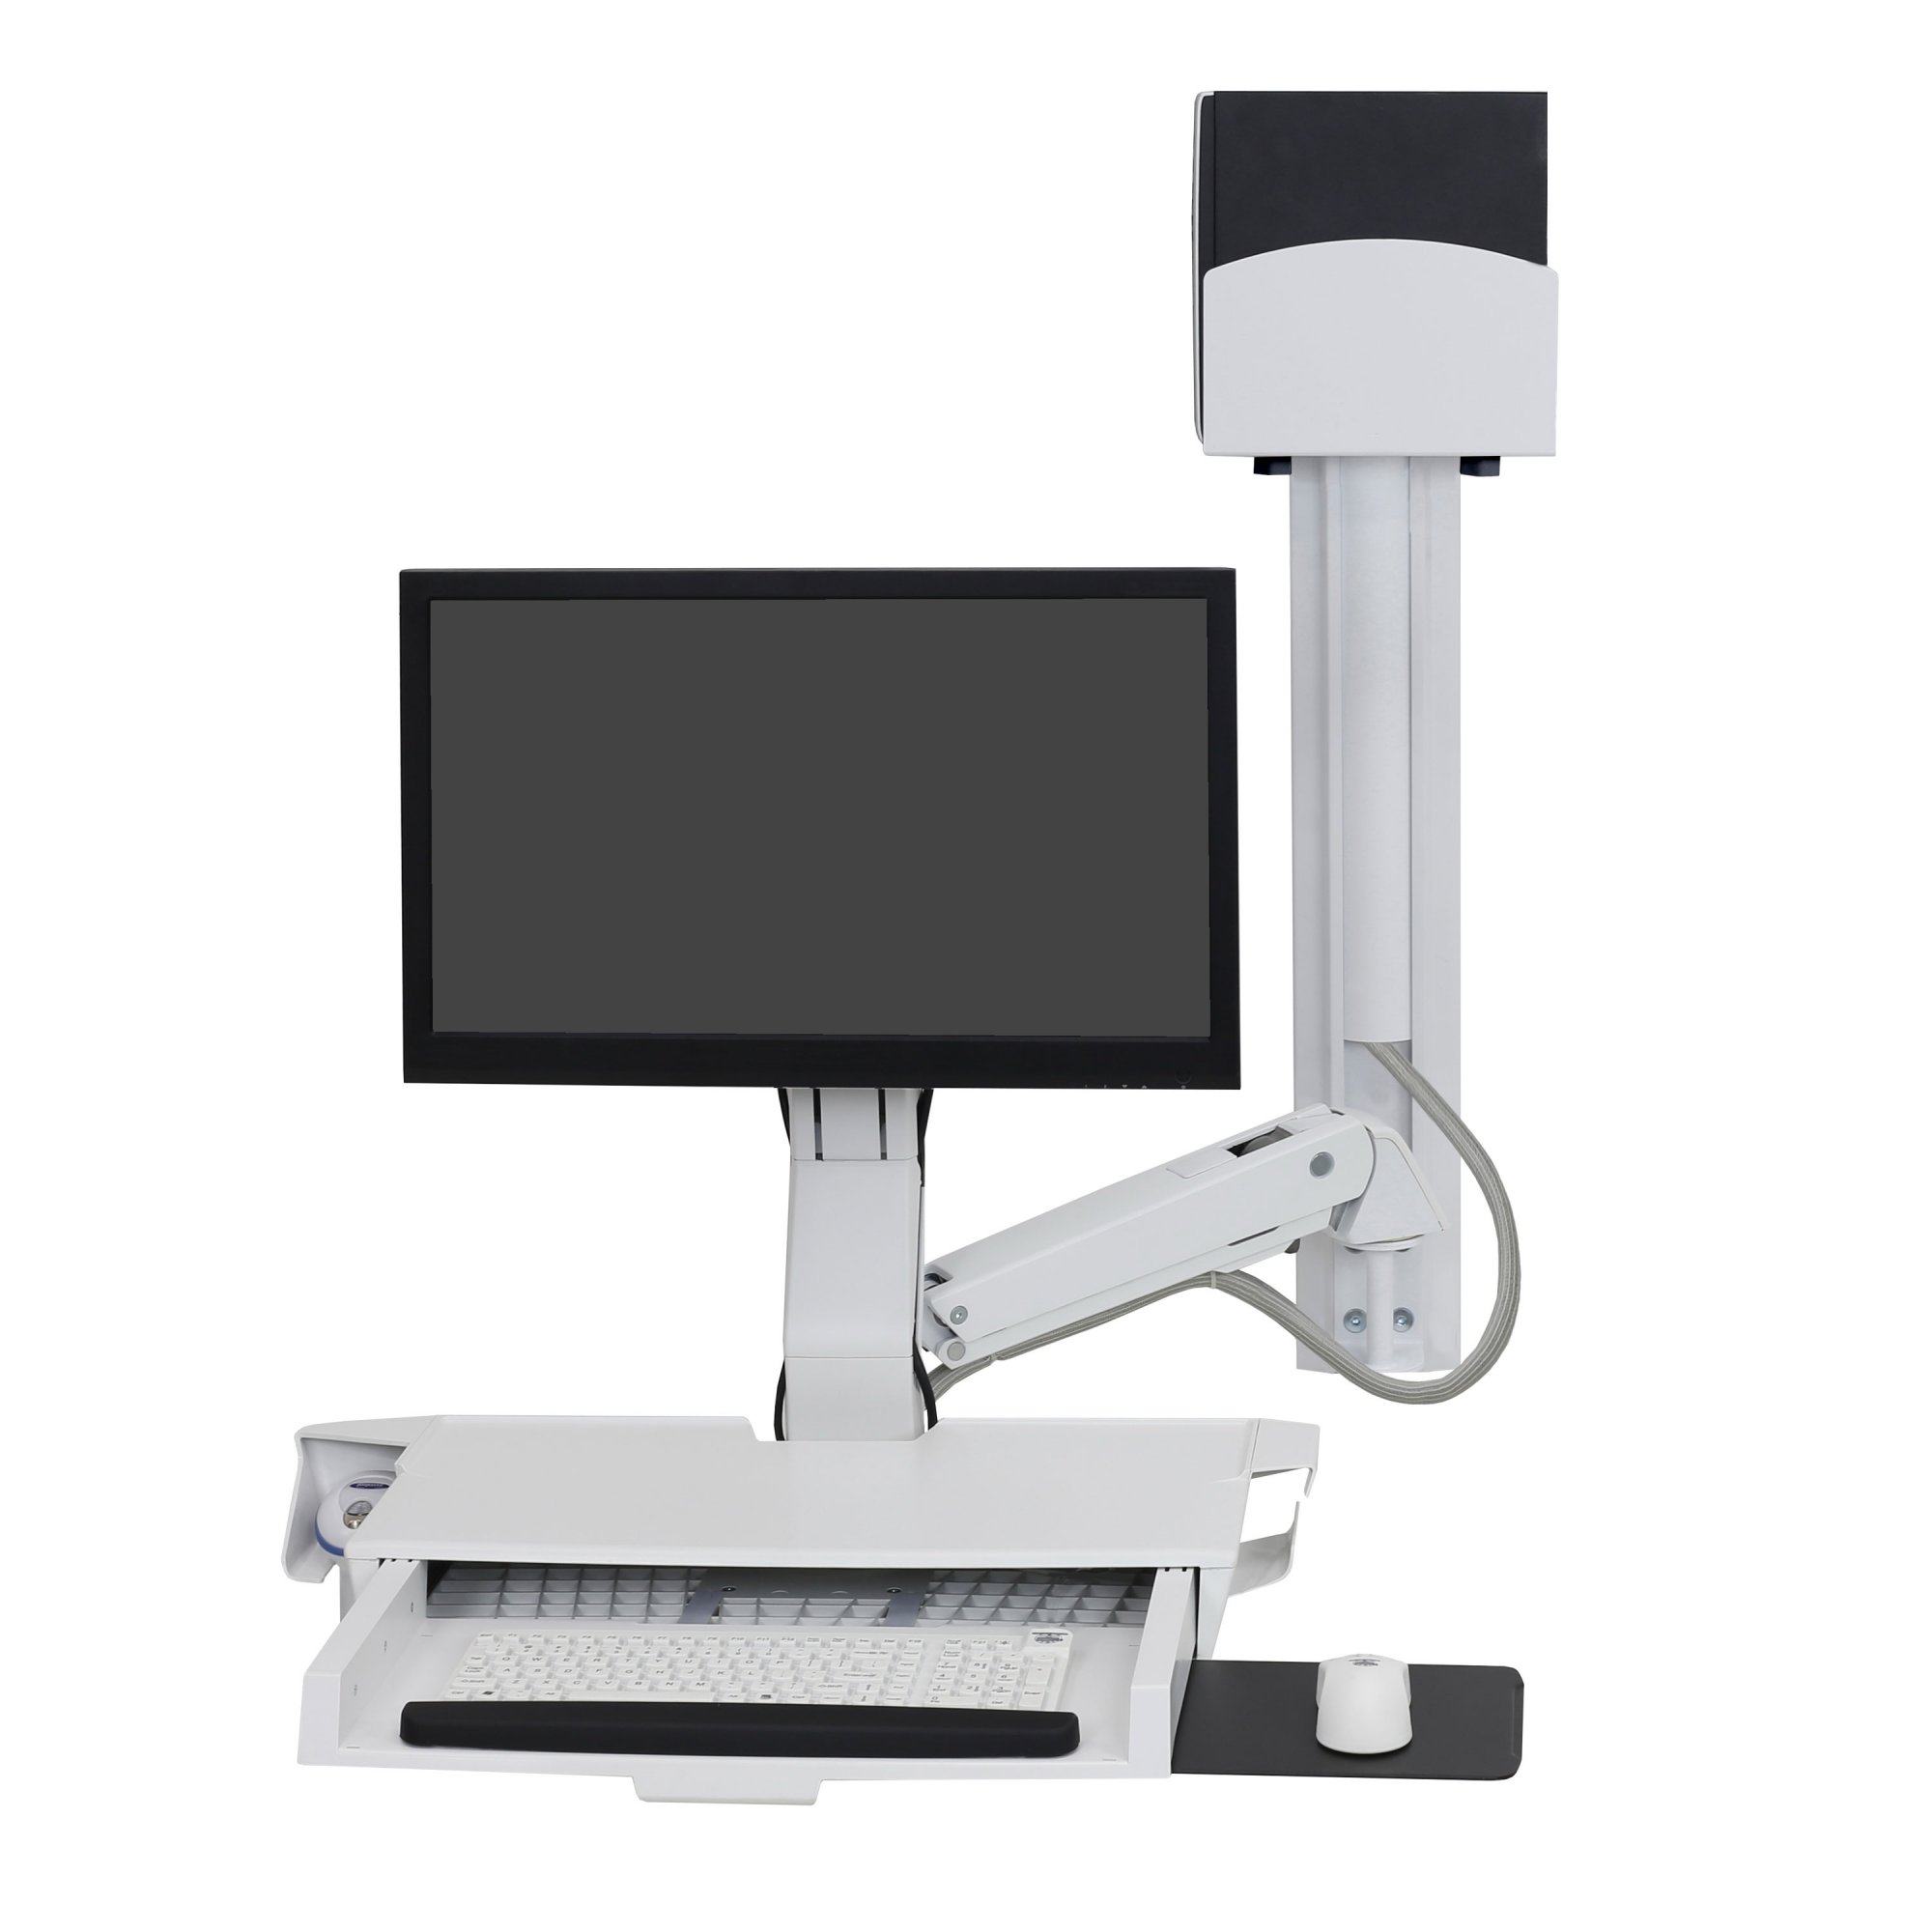 Ergotron 45-272-216 Sit-Stand Combo System, Worksurface (white)